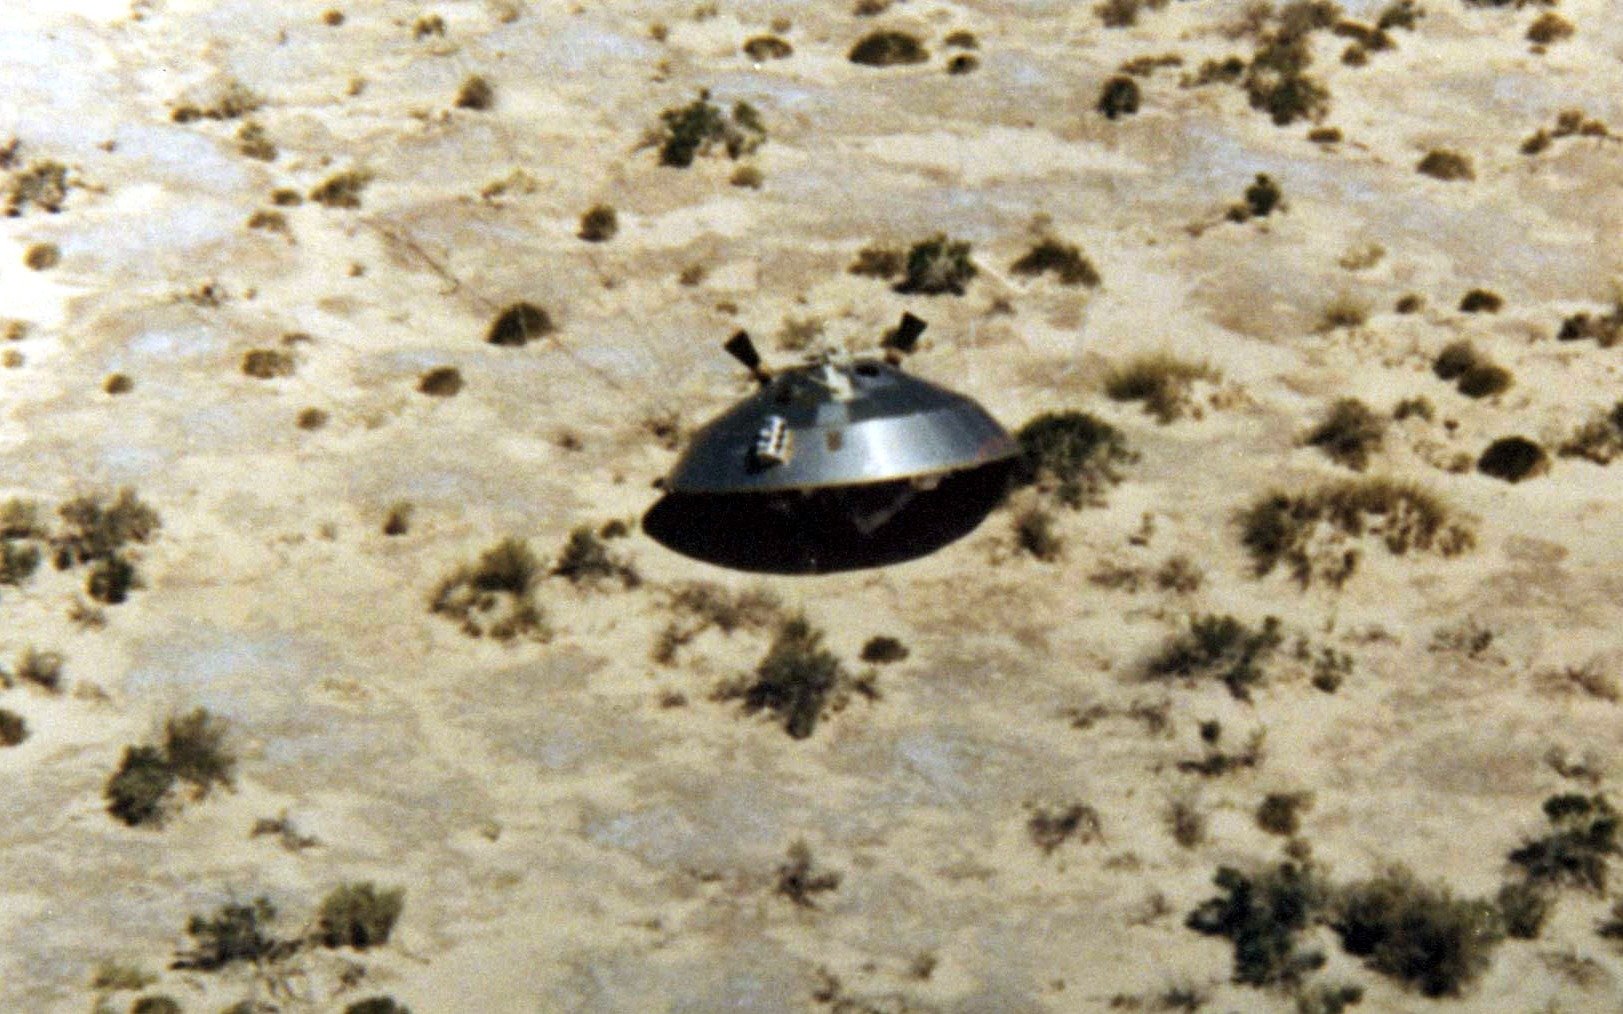 activist publishes redacted version military ufo